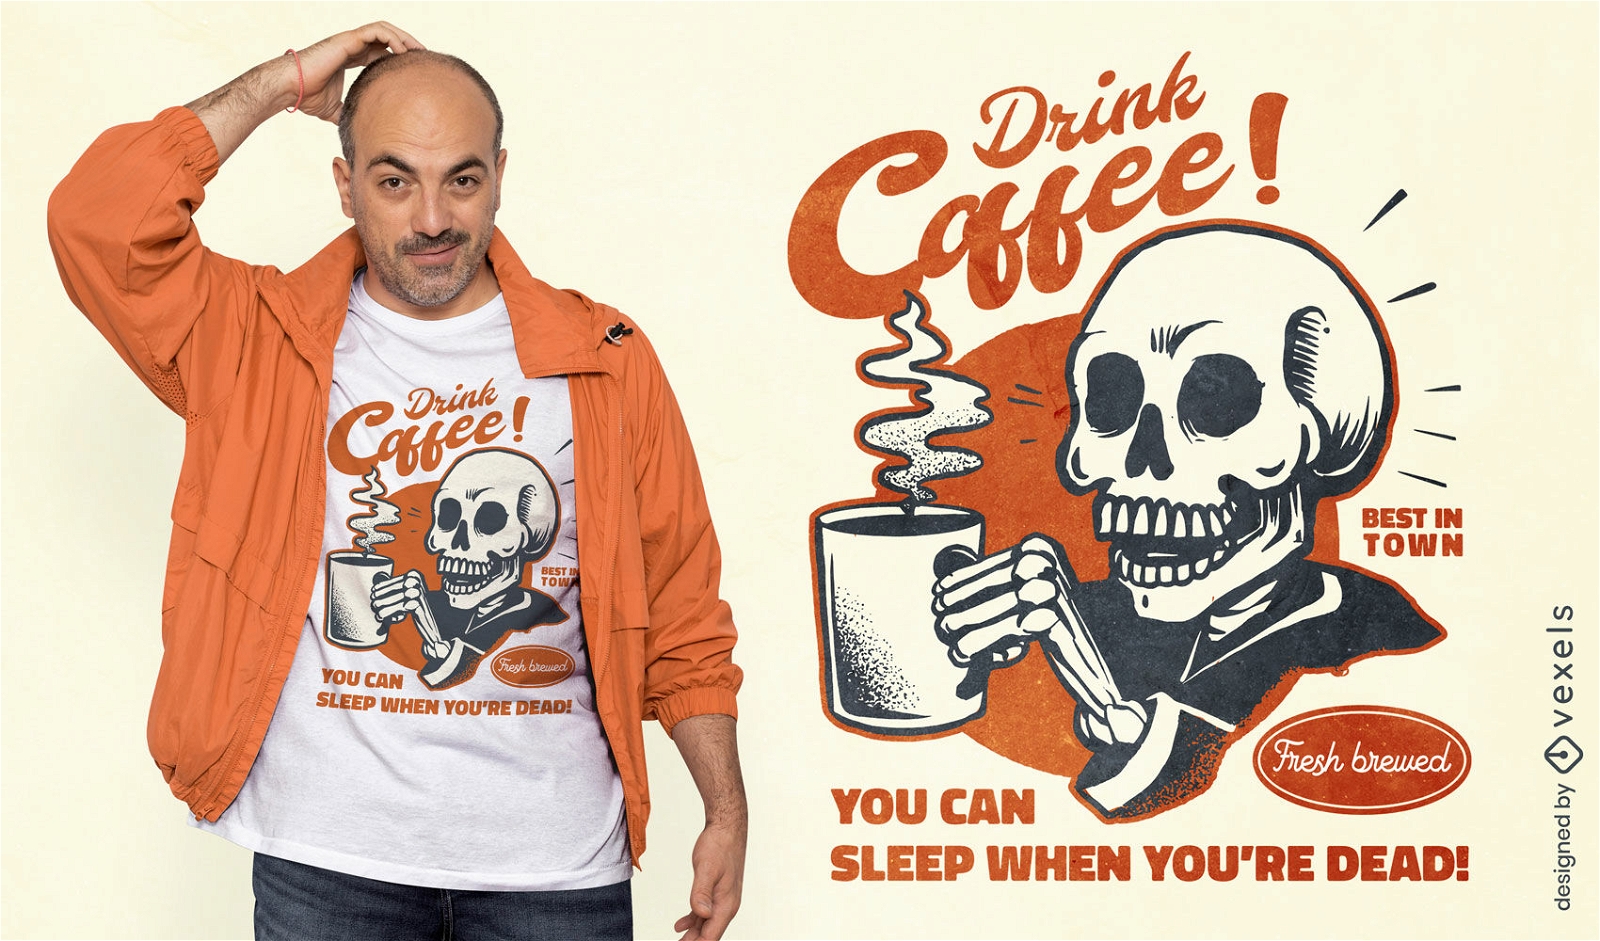 Vintage coffee funny quote t-shirt design